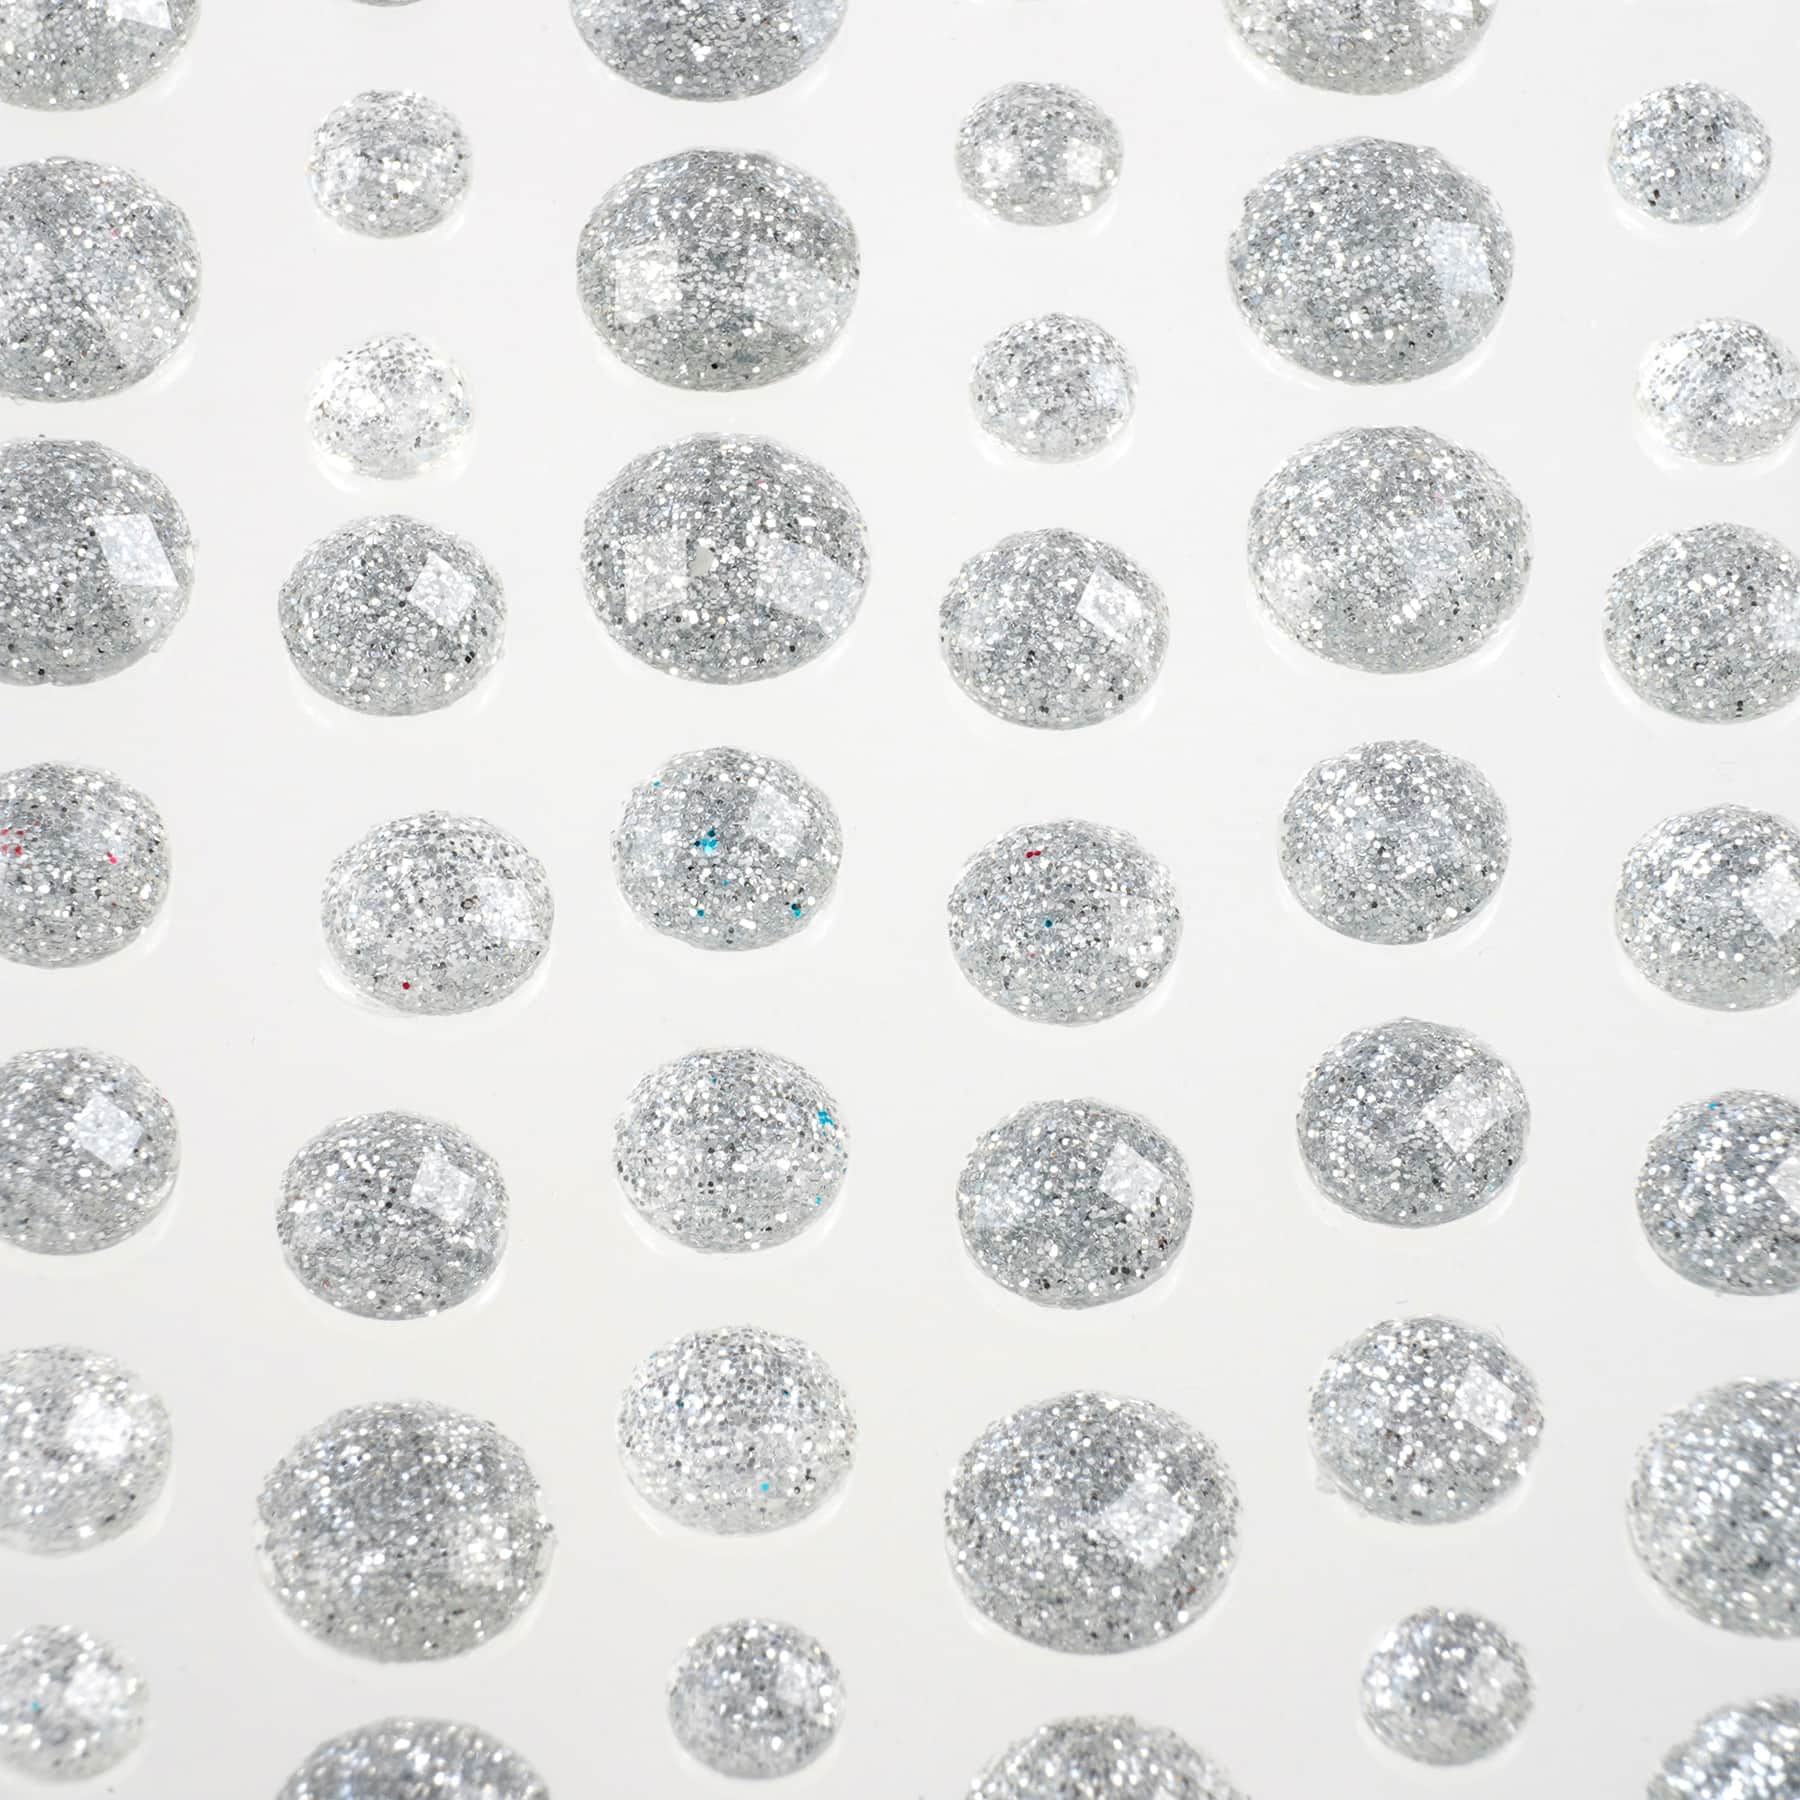 Gold Adhesive Rhinestone Stickers by Recollections™